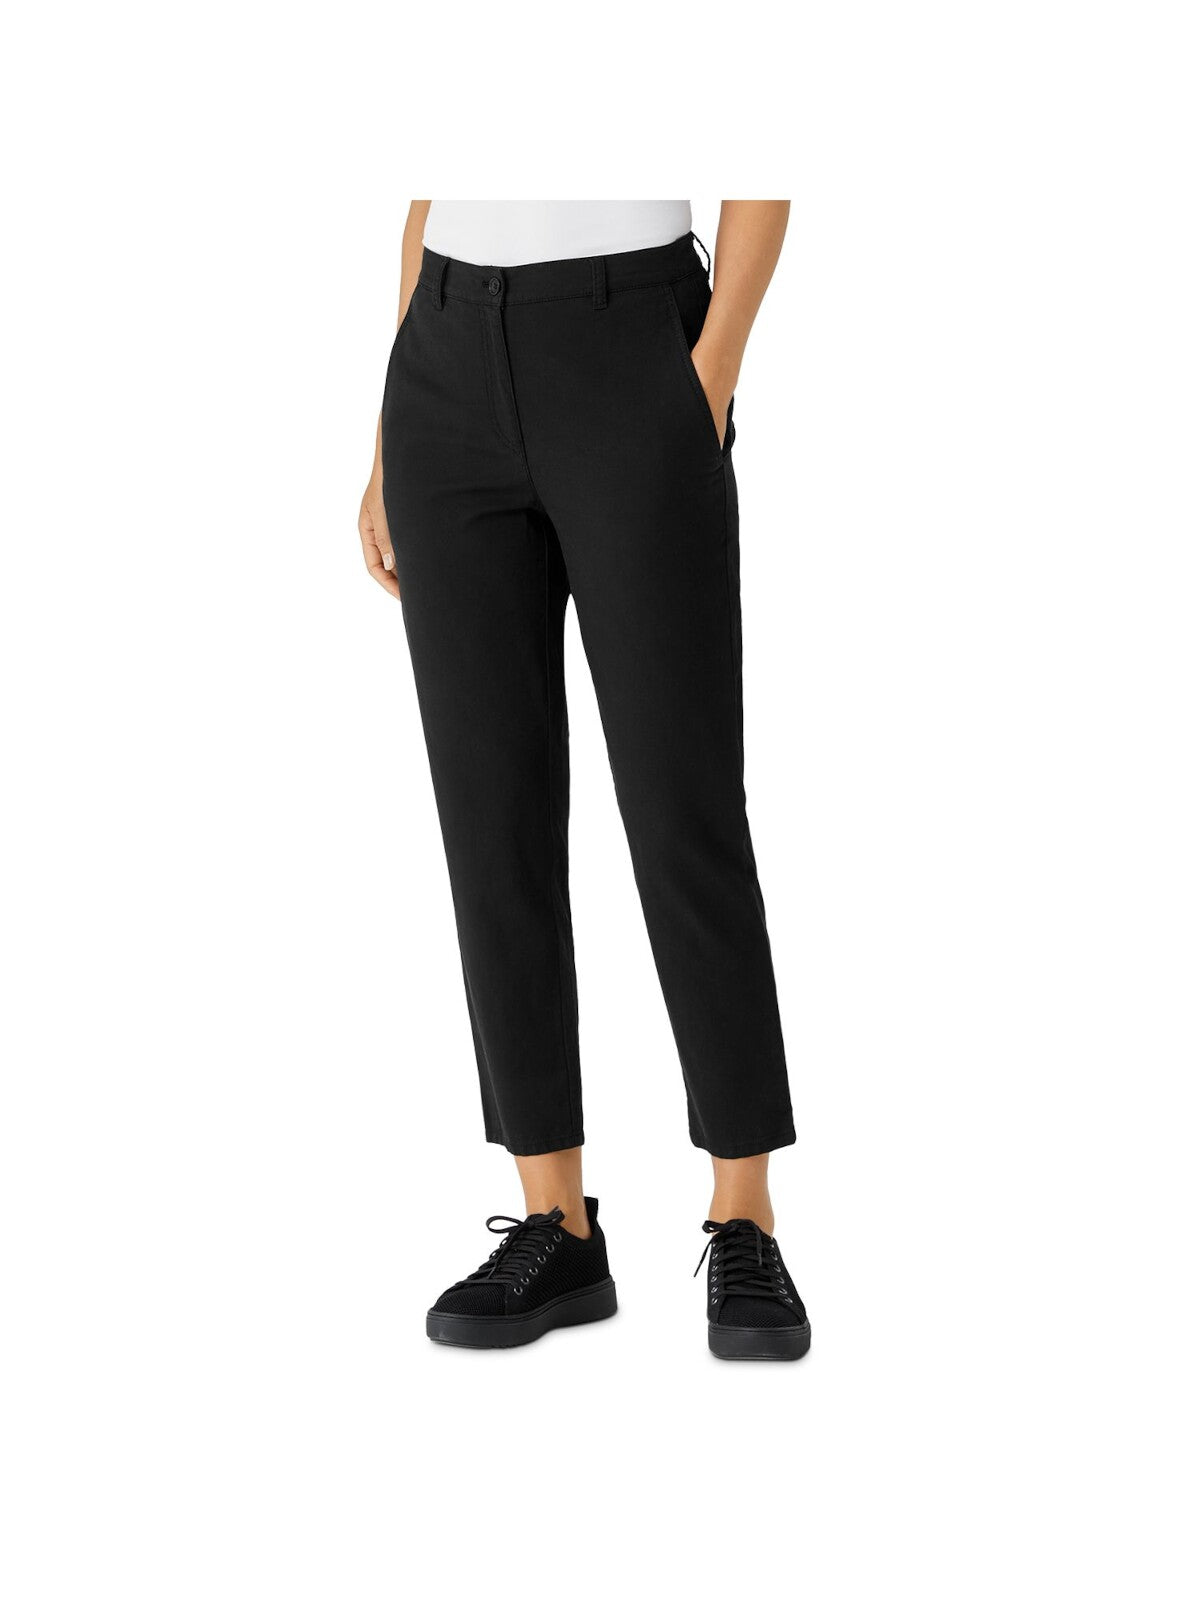 EILEEN FISHER Womens Black Pocketed Pants 18